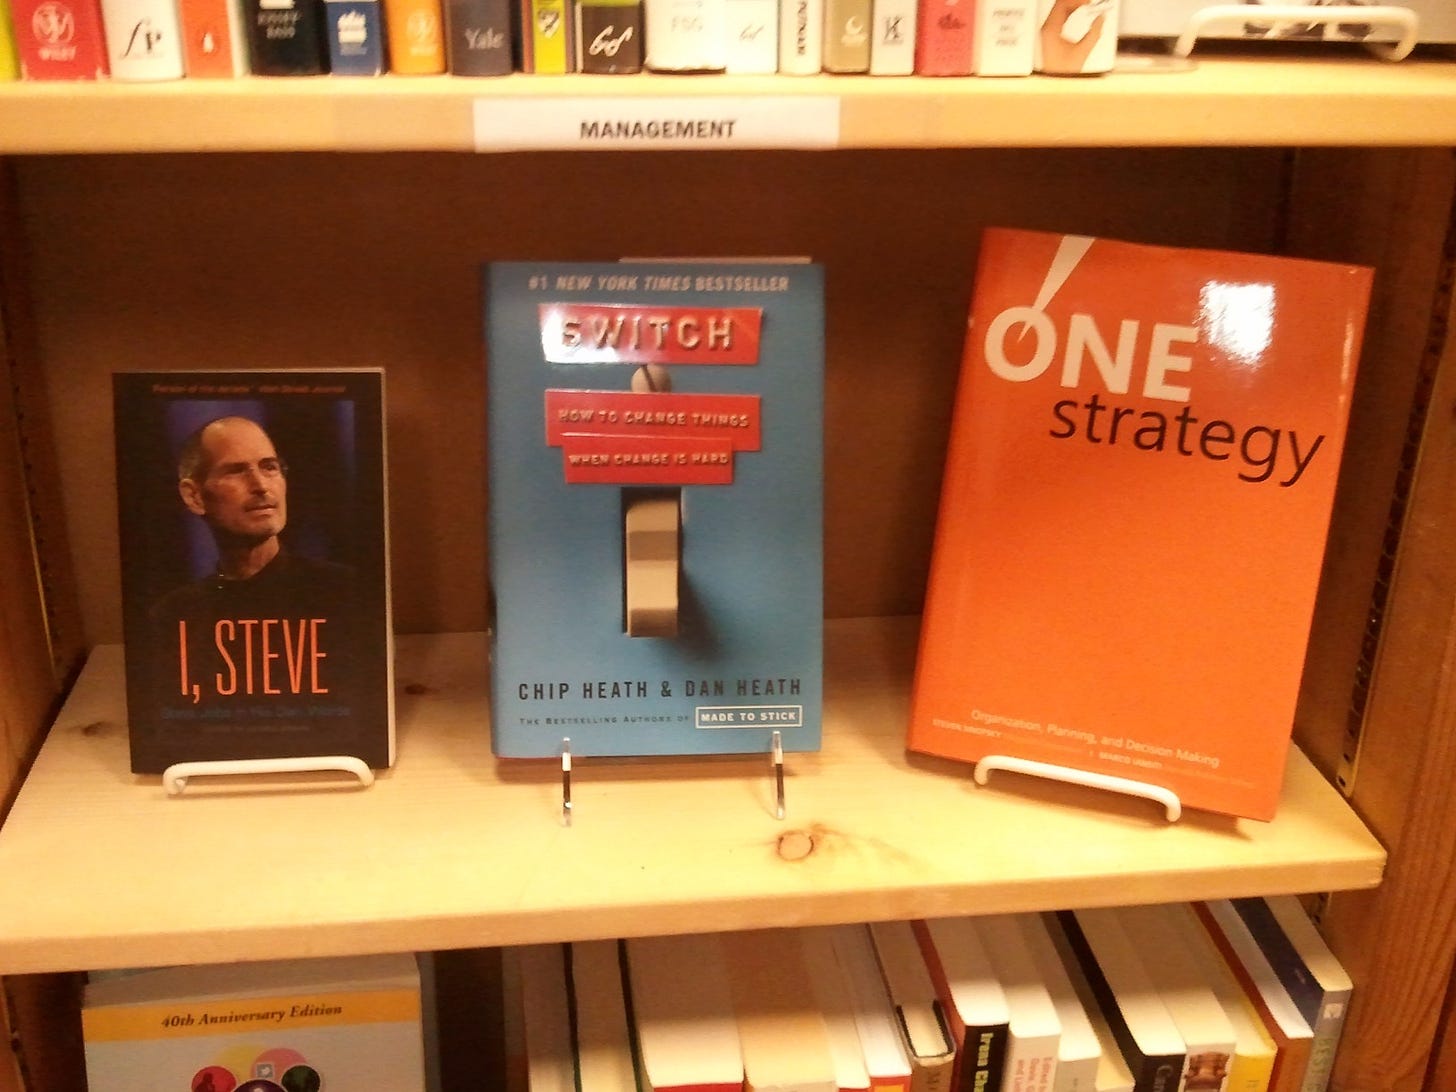 Photo of a bookshelf at a bookstore featuring One Strategy by author and also a book on Steve Jobs called "I, Steve"